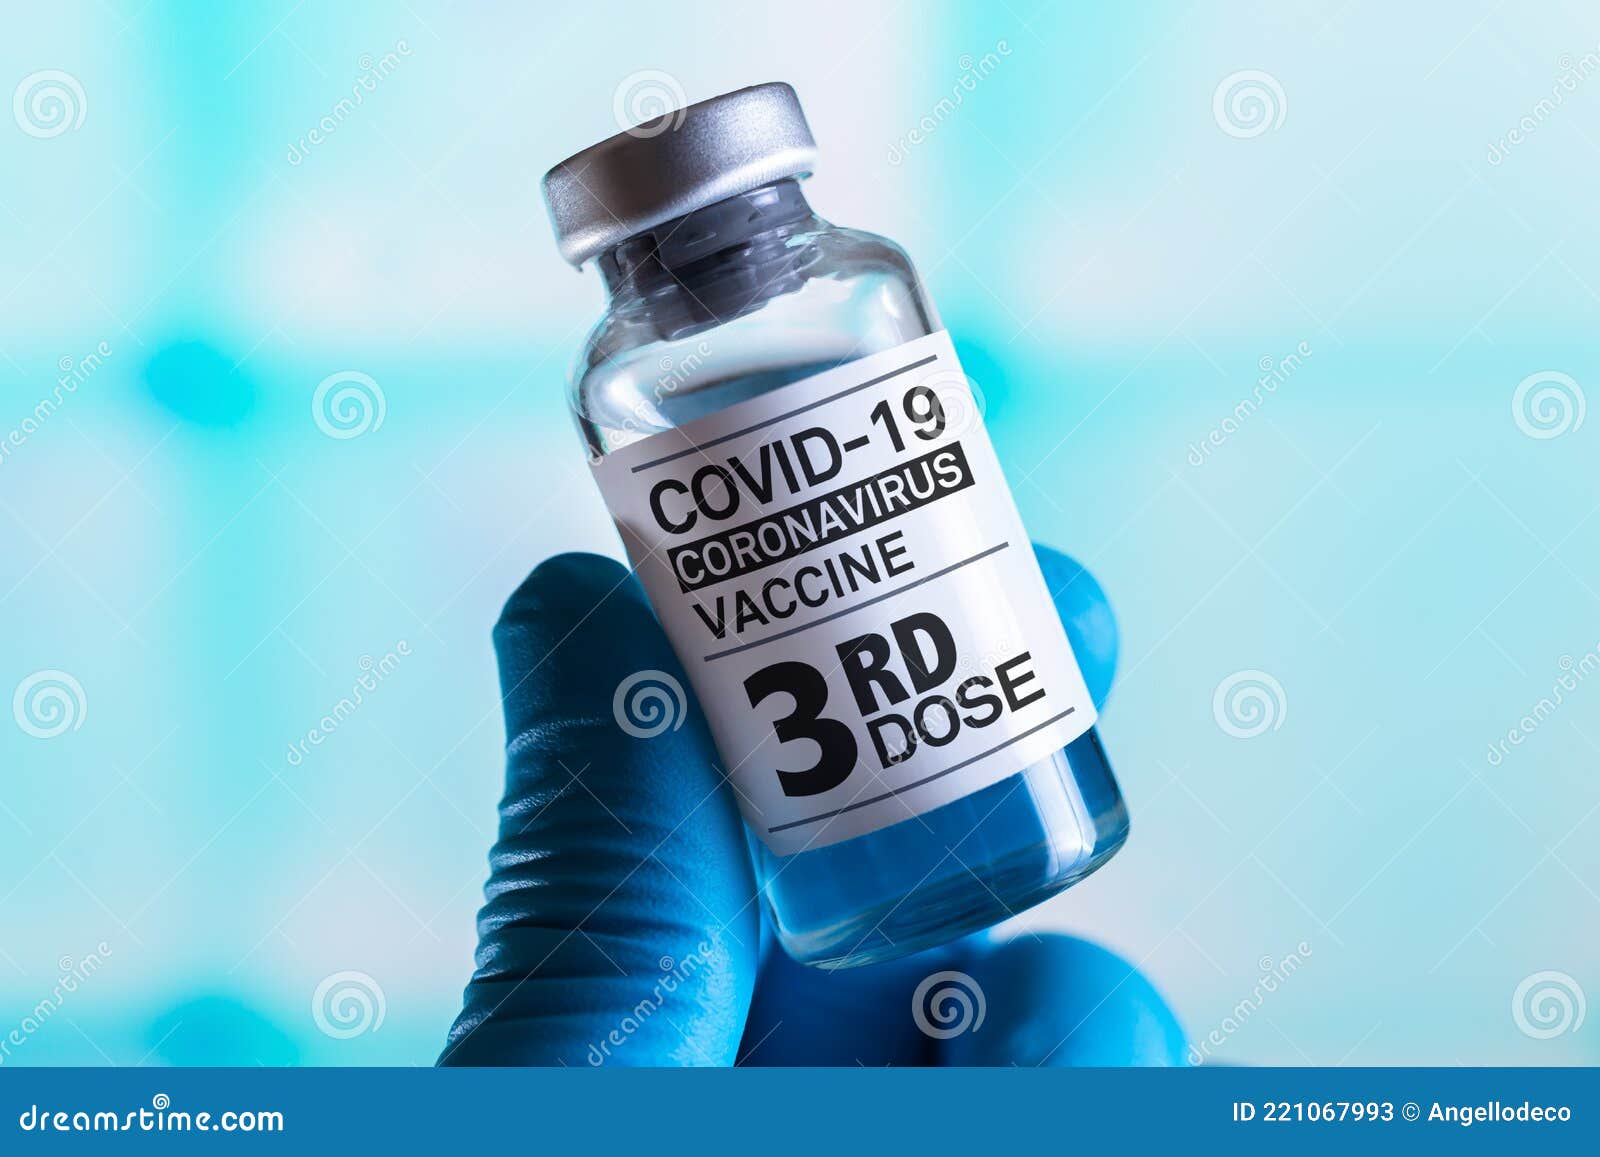 covid-19 vaccine vial for vaccination tagged with 3rd dose